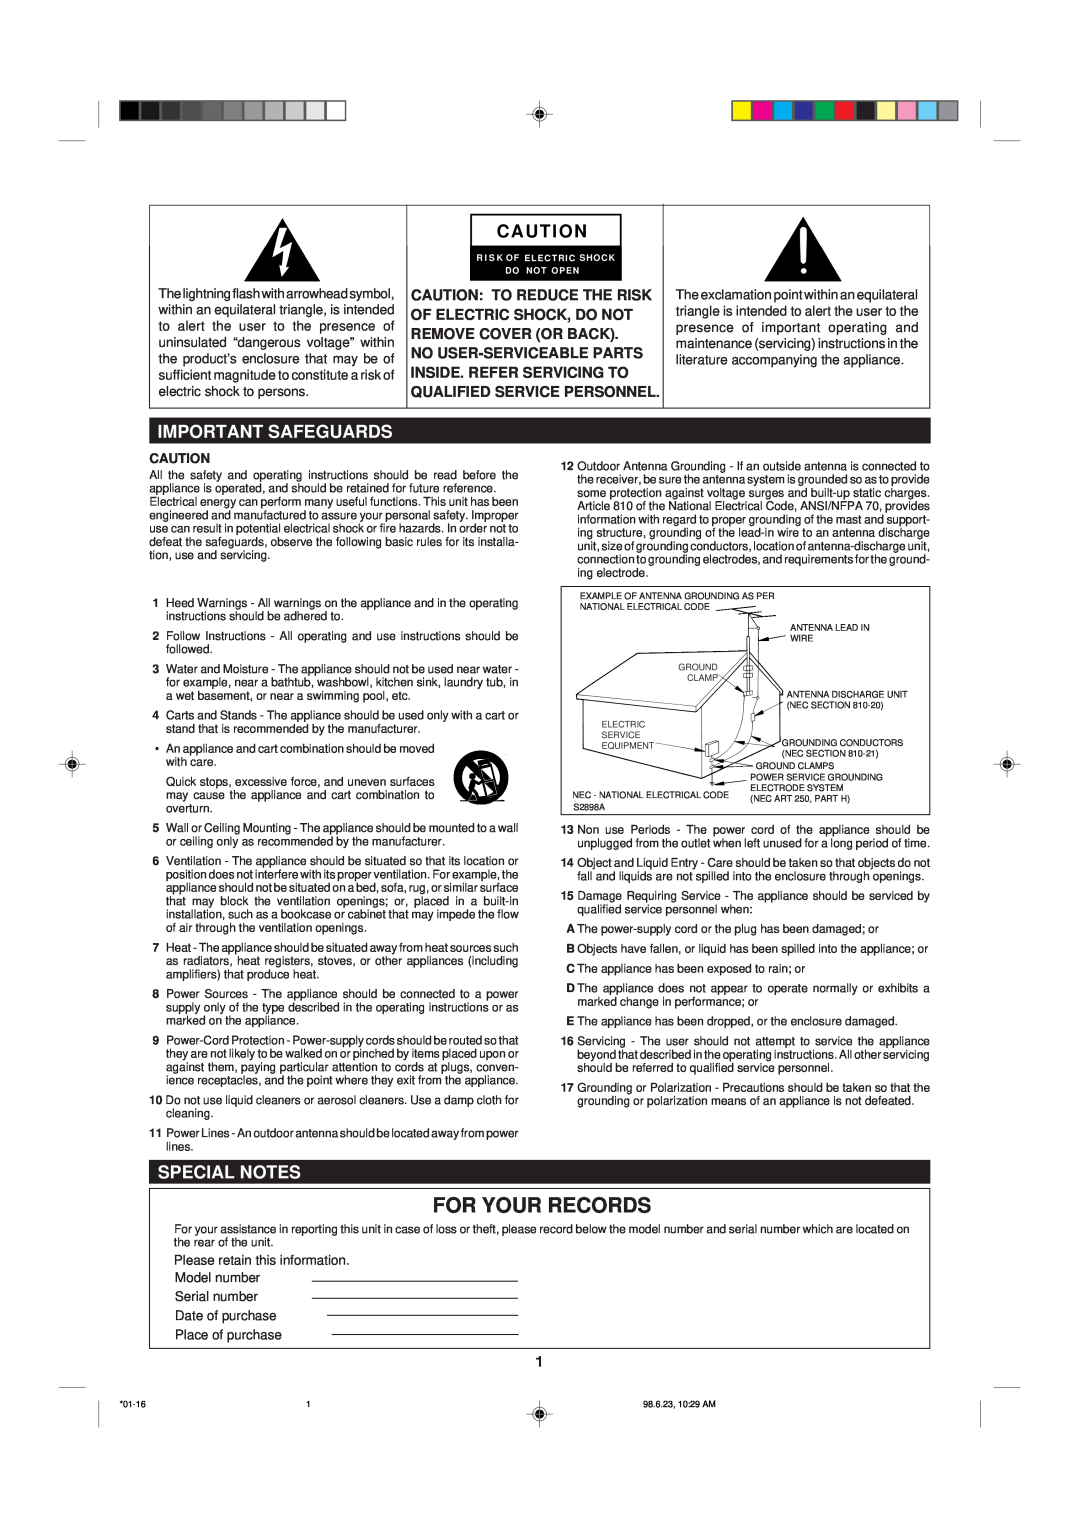 Sharp MD-X8 operation manual For Your Records, Important Safeguards, Special Notes 